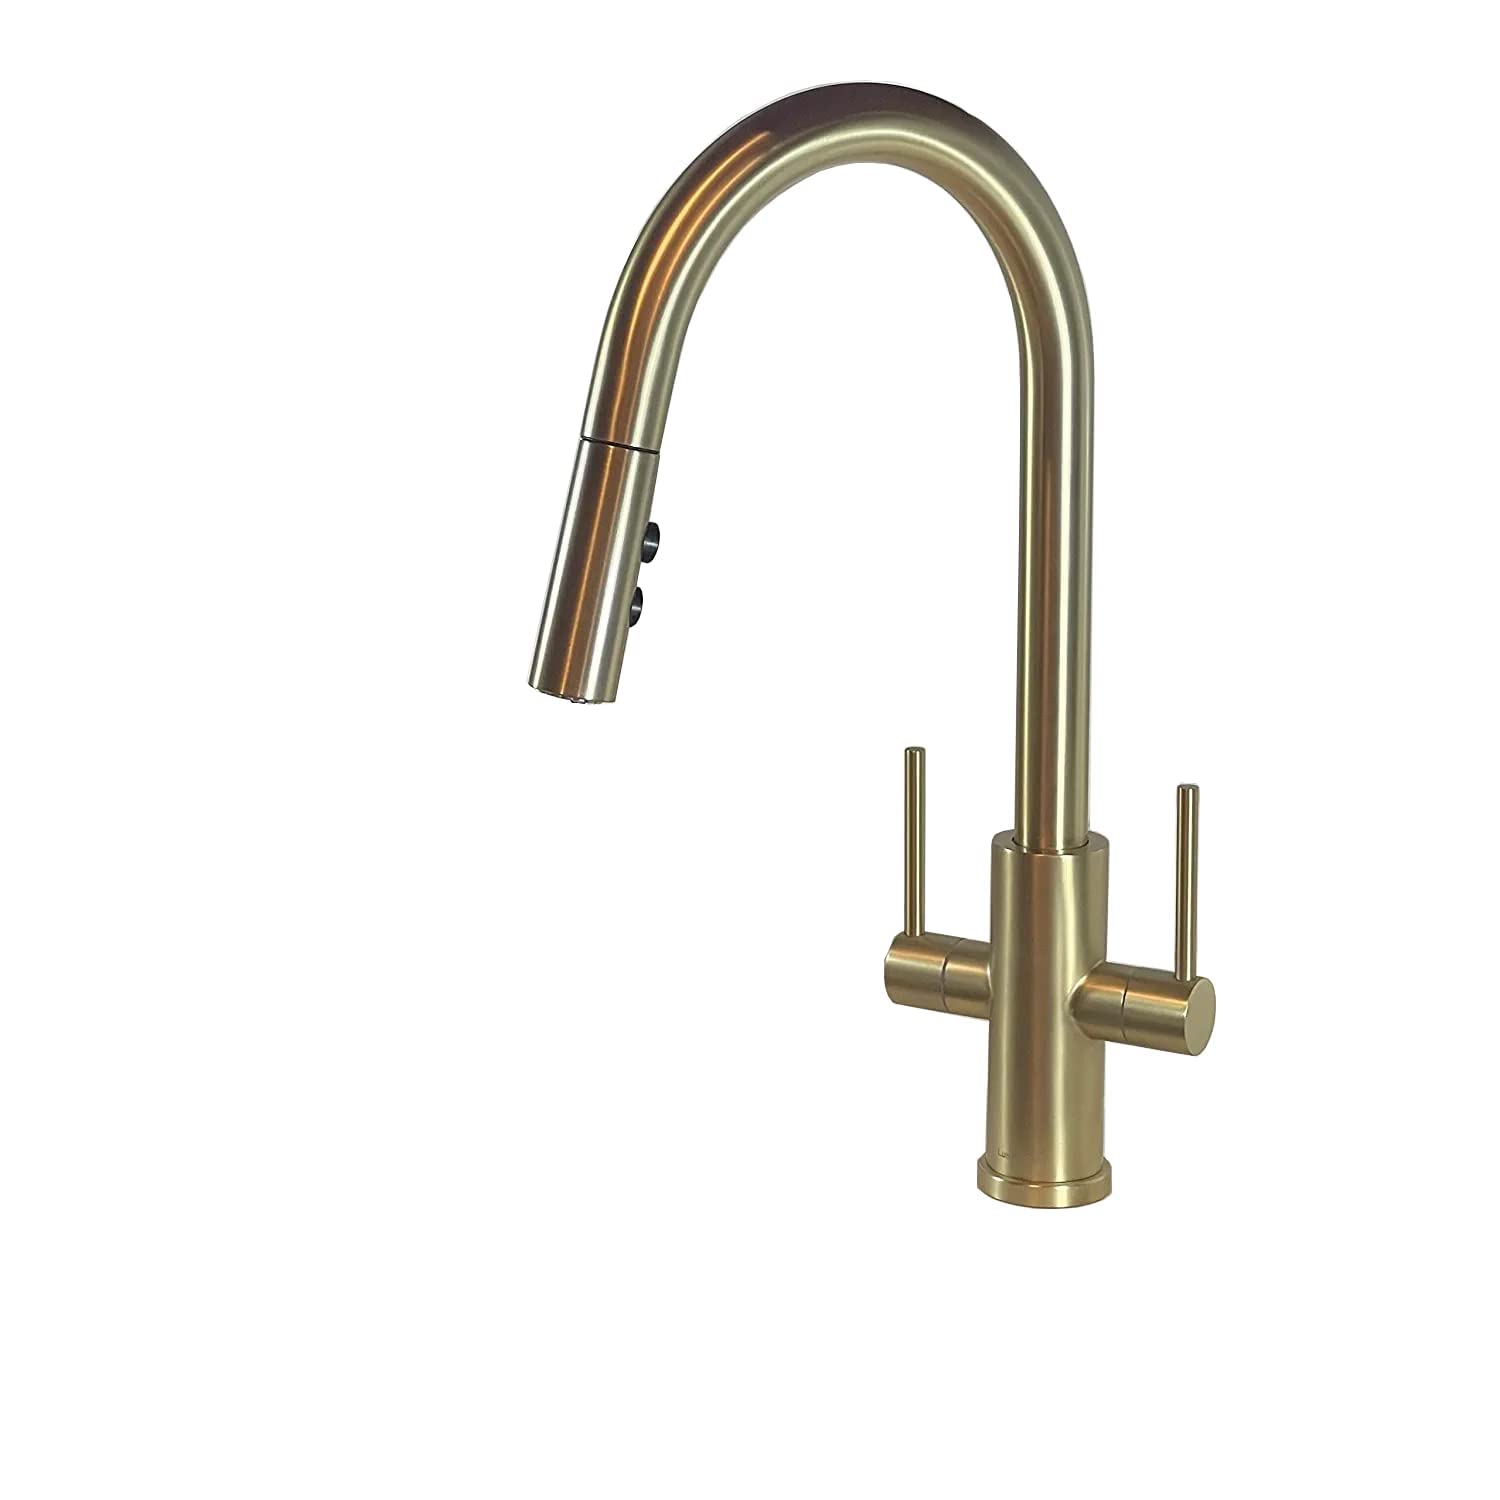 Luna&Muni.Kitchen Faucet Satin Gold,Kitchen faucets,Kitchen Faucet with Pull Down Sprayer, Kitchen Sink Faucet with 2 Handles,Kitchen Sink faucets,Kitchen Sink faucets with pullout Sprayer